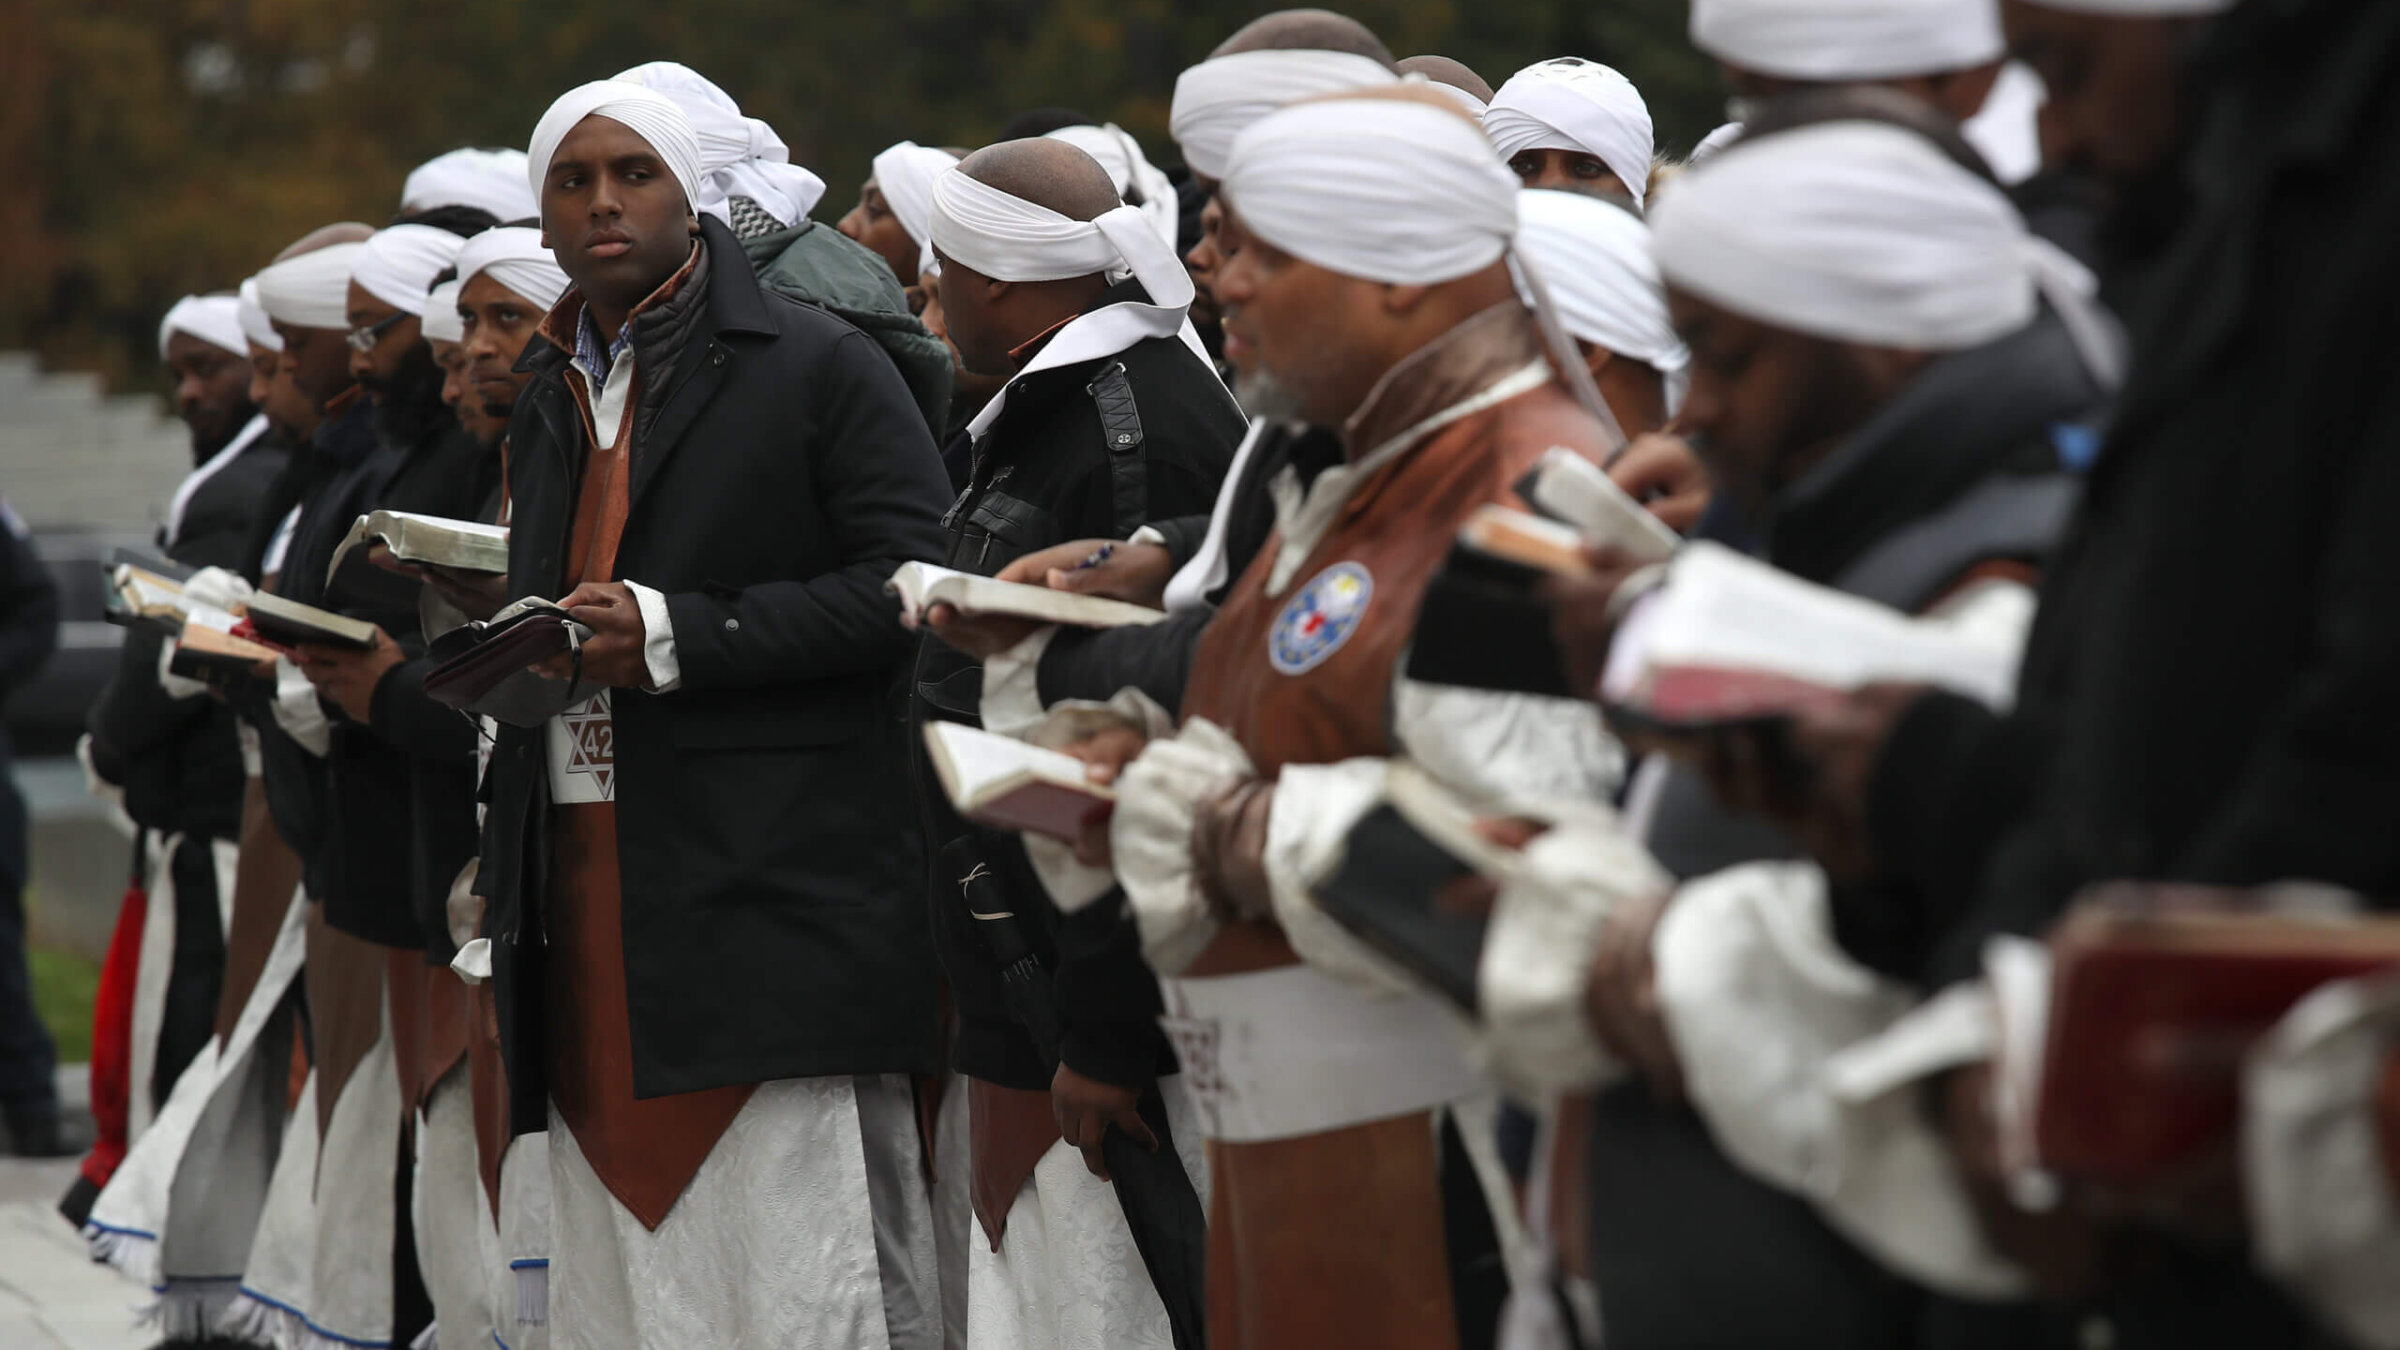 Members of a Hebrew Israelite group demonstrate outside the U.S. Capitol on November 13, 2018 in Washington, D.C. 